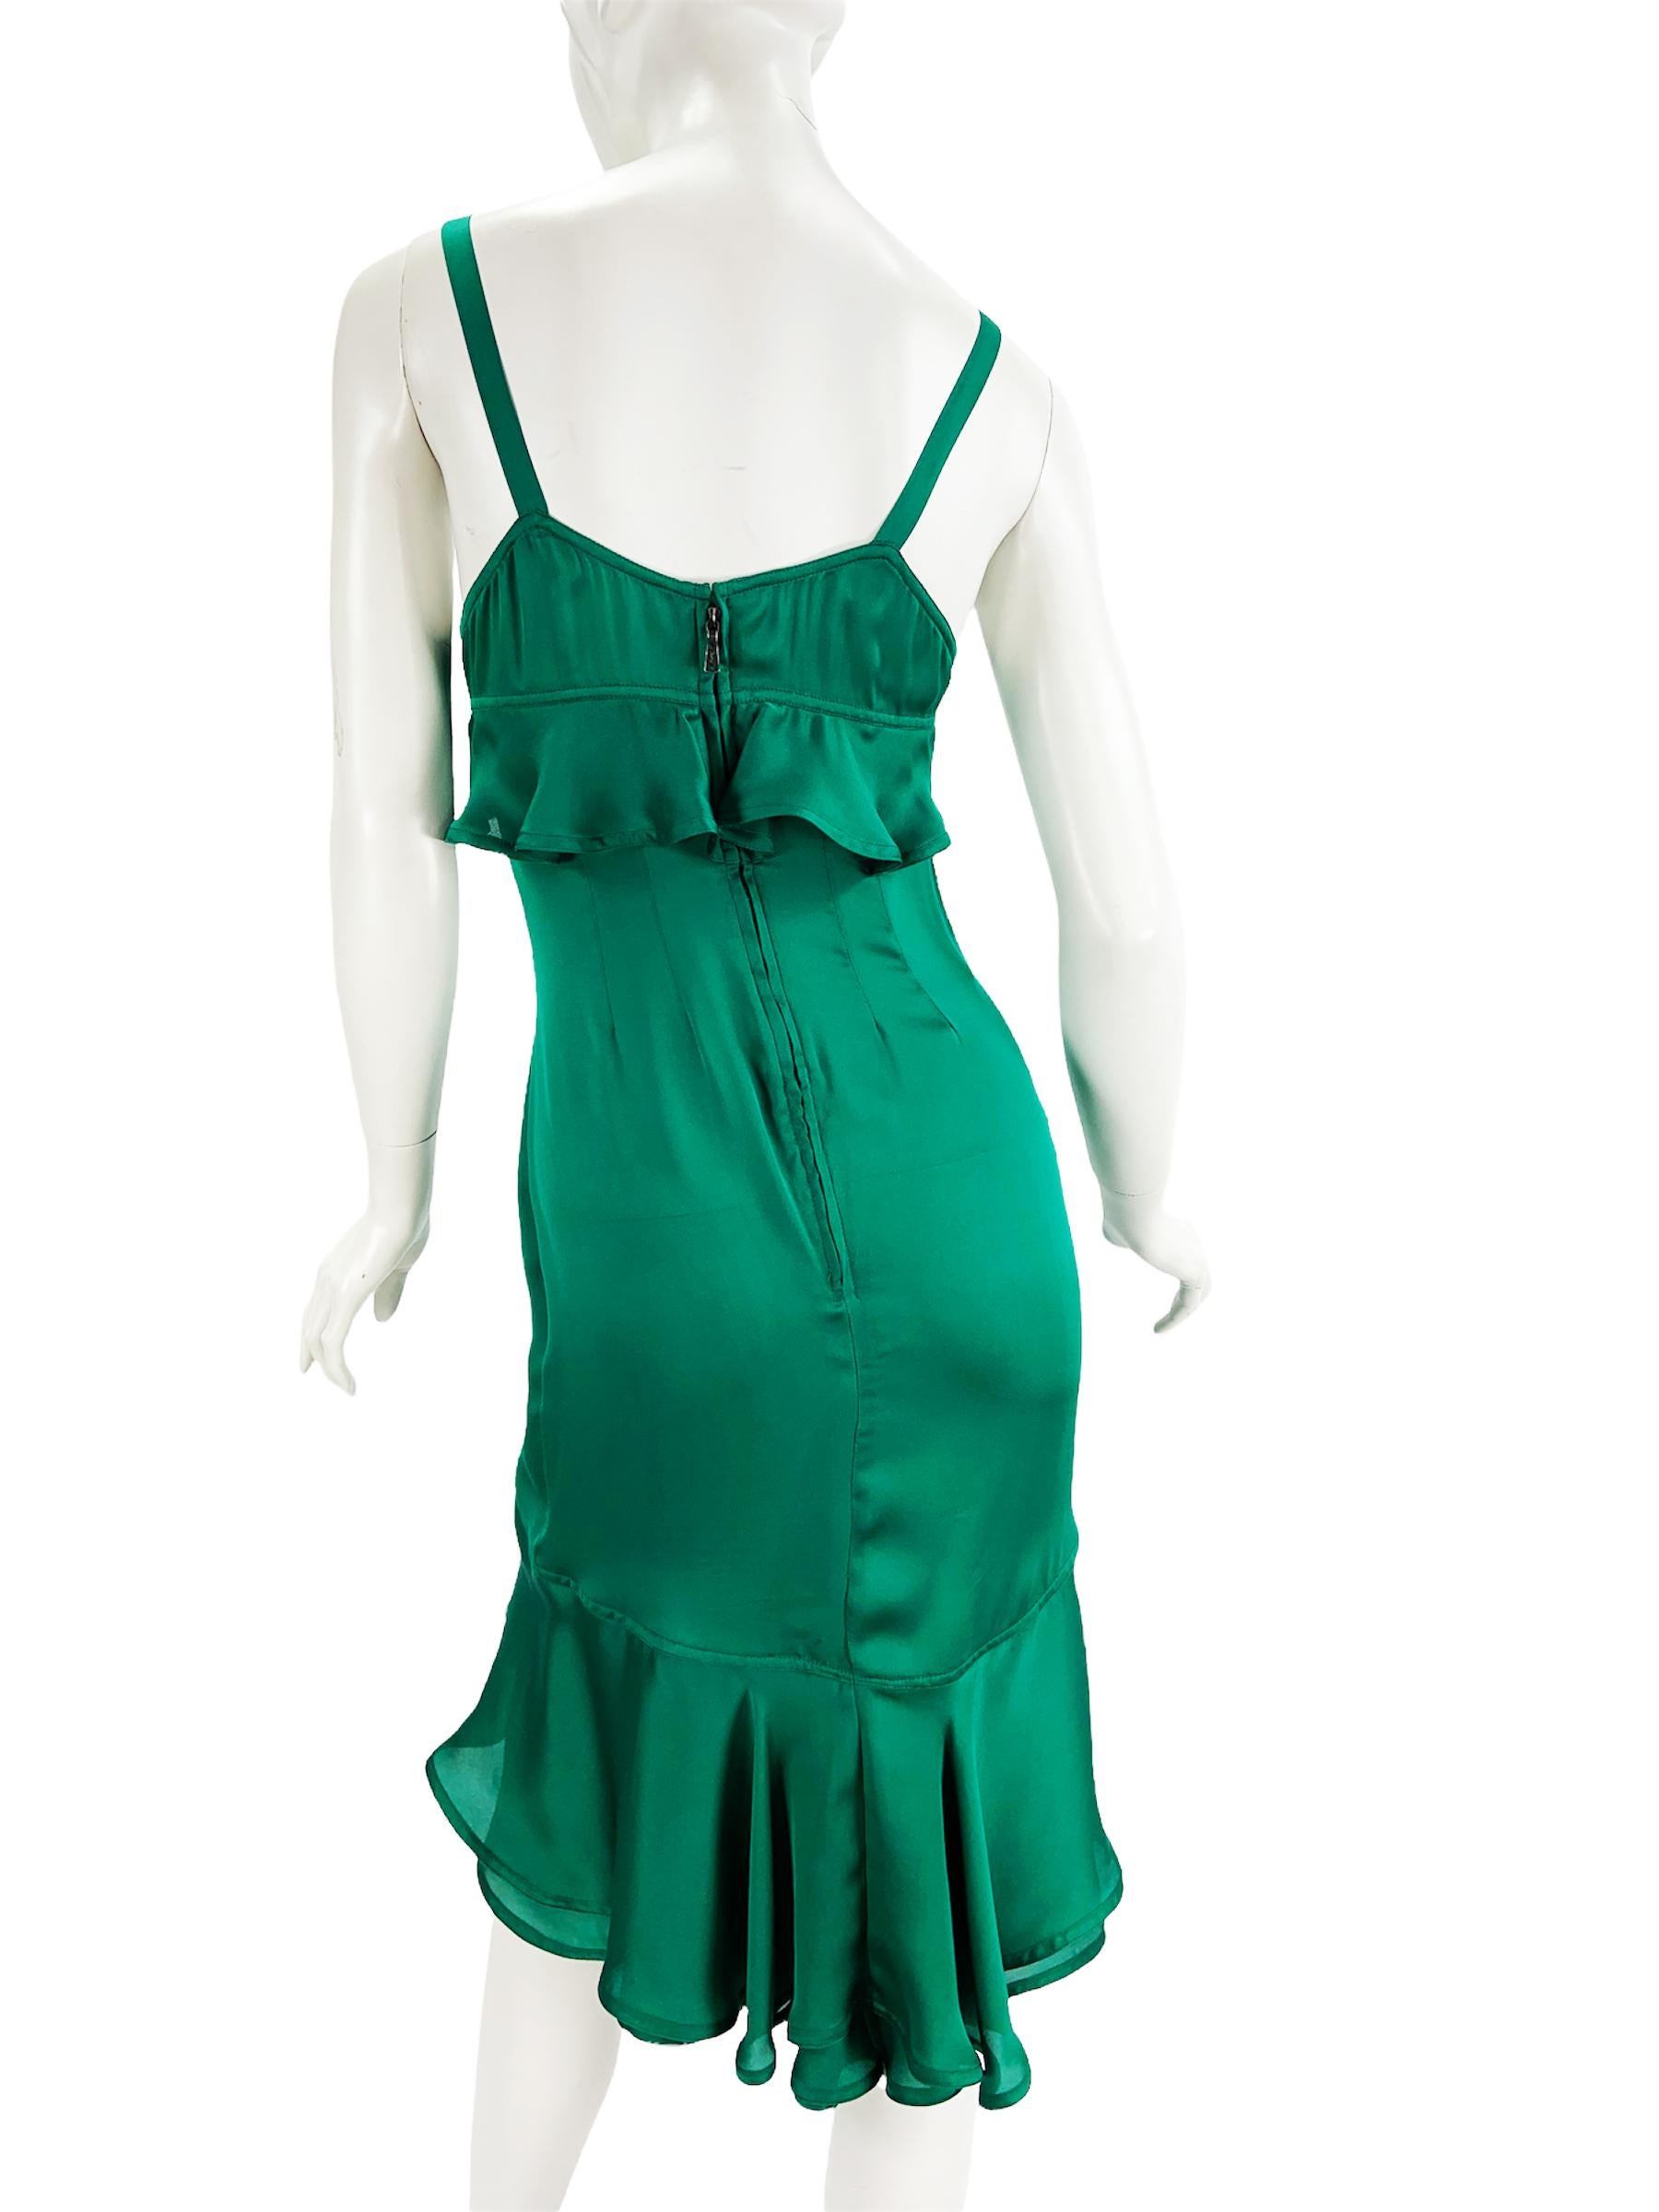 Tom Ford for Yves Saint Laurent AD Campaign F/W 2003 Silk Green Ruffle Dress   For Sale 1